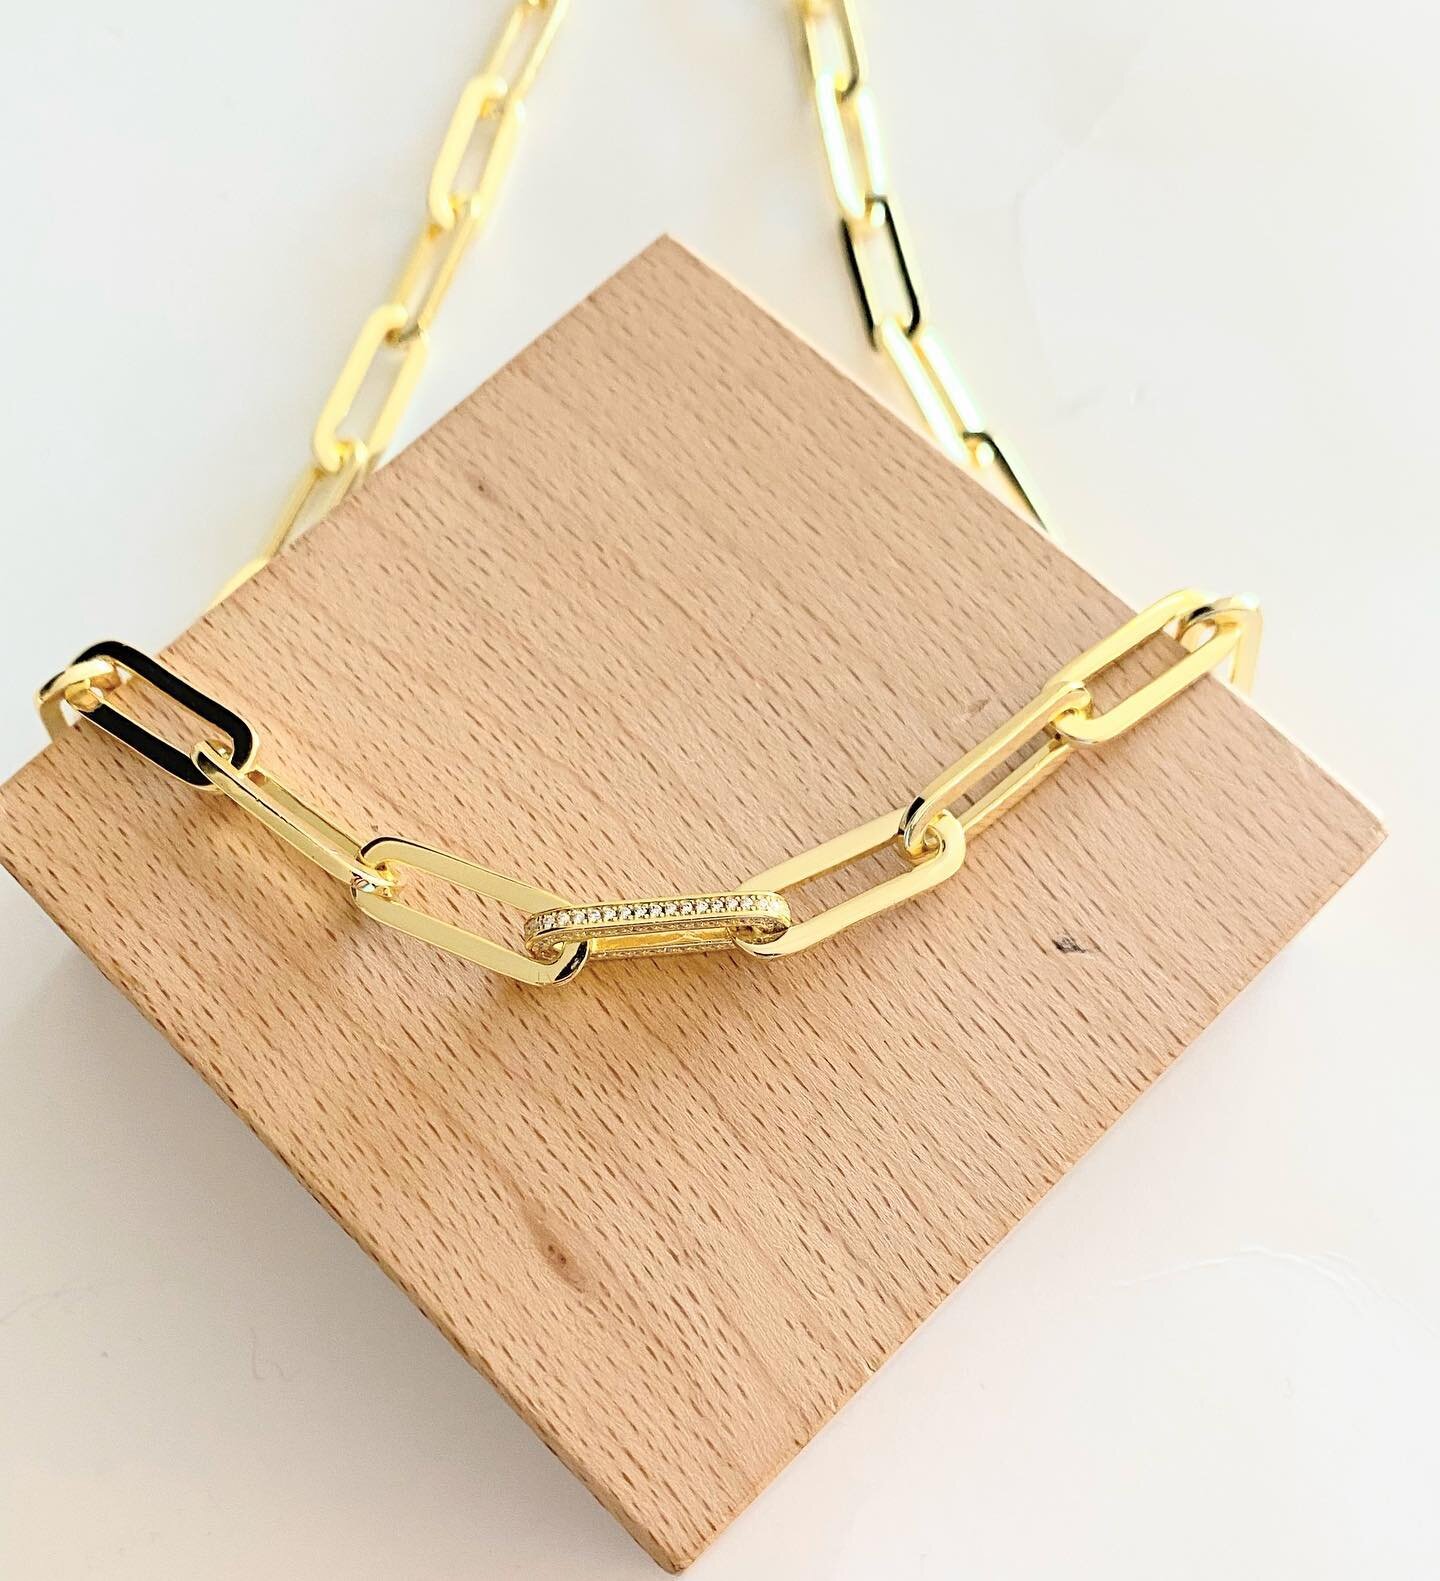 Our new gold link necklace, shop the collection ❤️❤️❤️❤️❤️